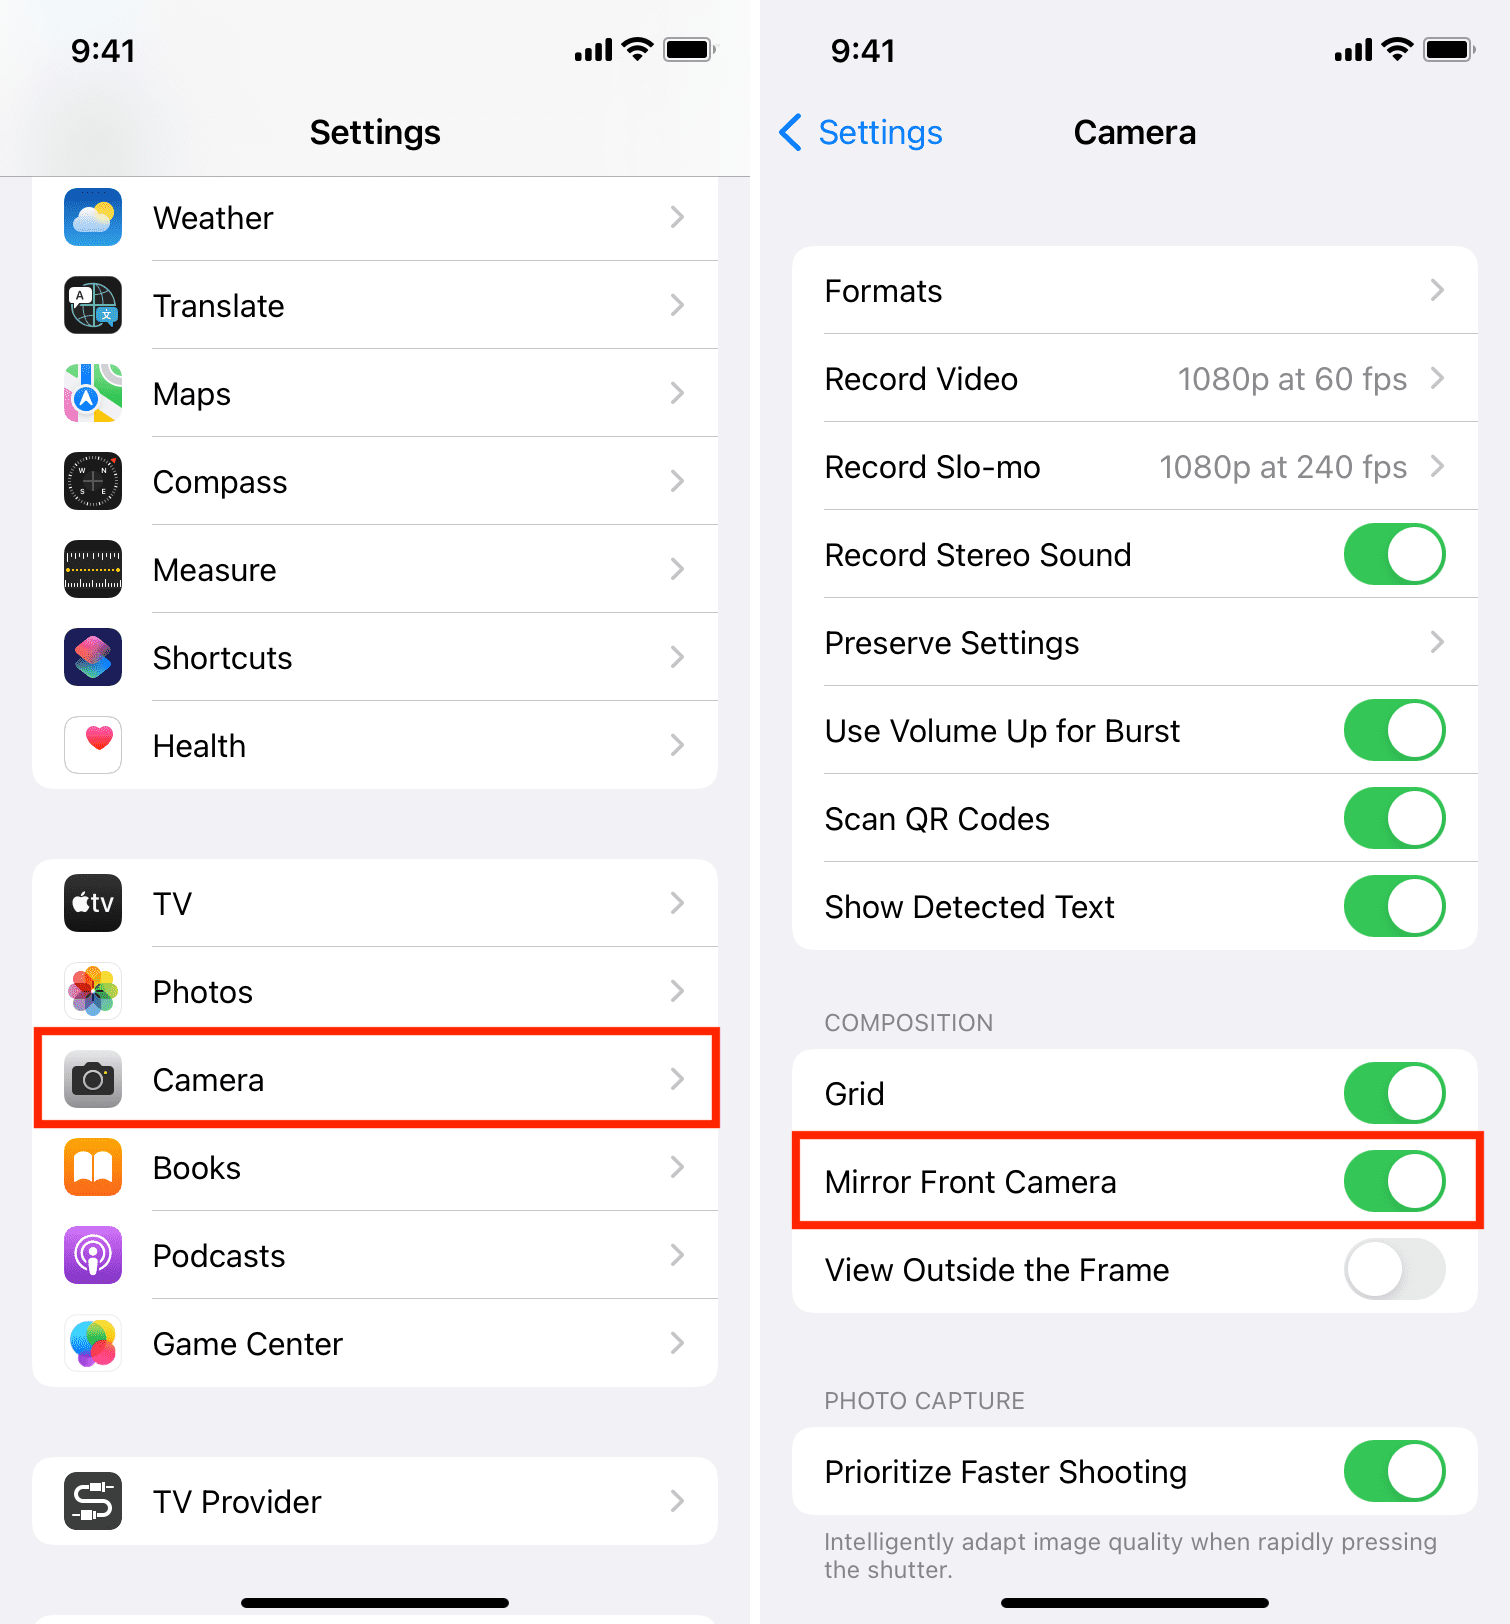 Mirror Front Camera option in iPhone Camera settings